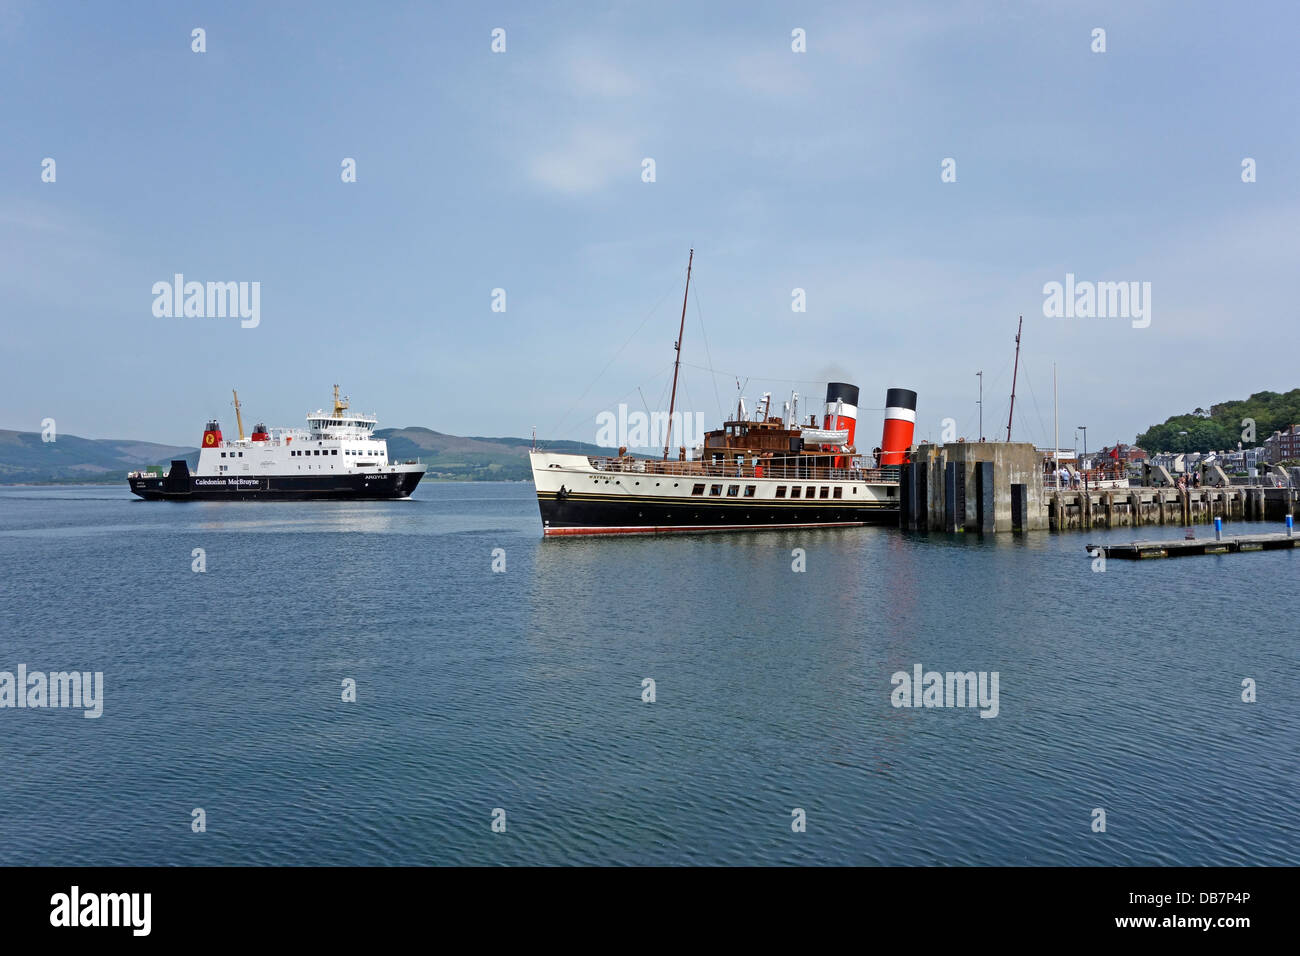 CalMac car & passenger ferry Argyle arrives at Rothesay on Bute Scotland from Wemyss Bay with paddle steamer Waverley at quay Stock Photo